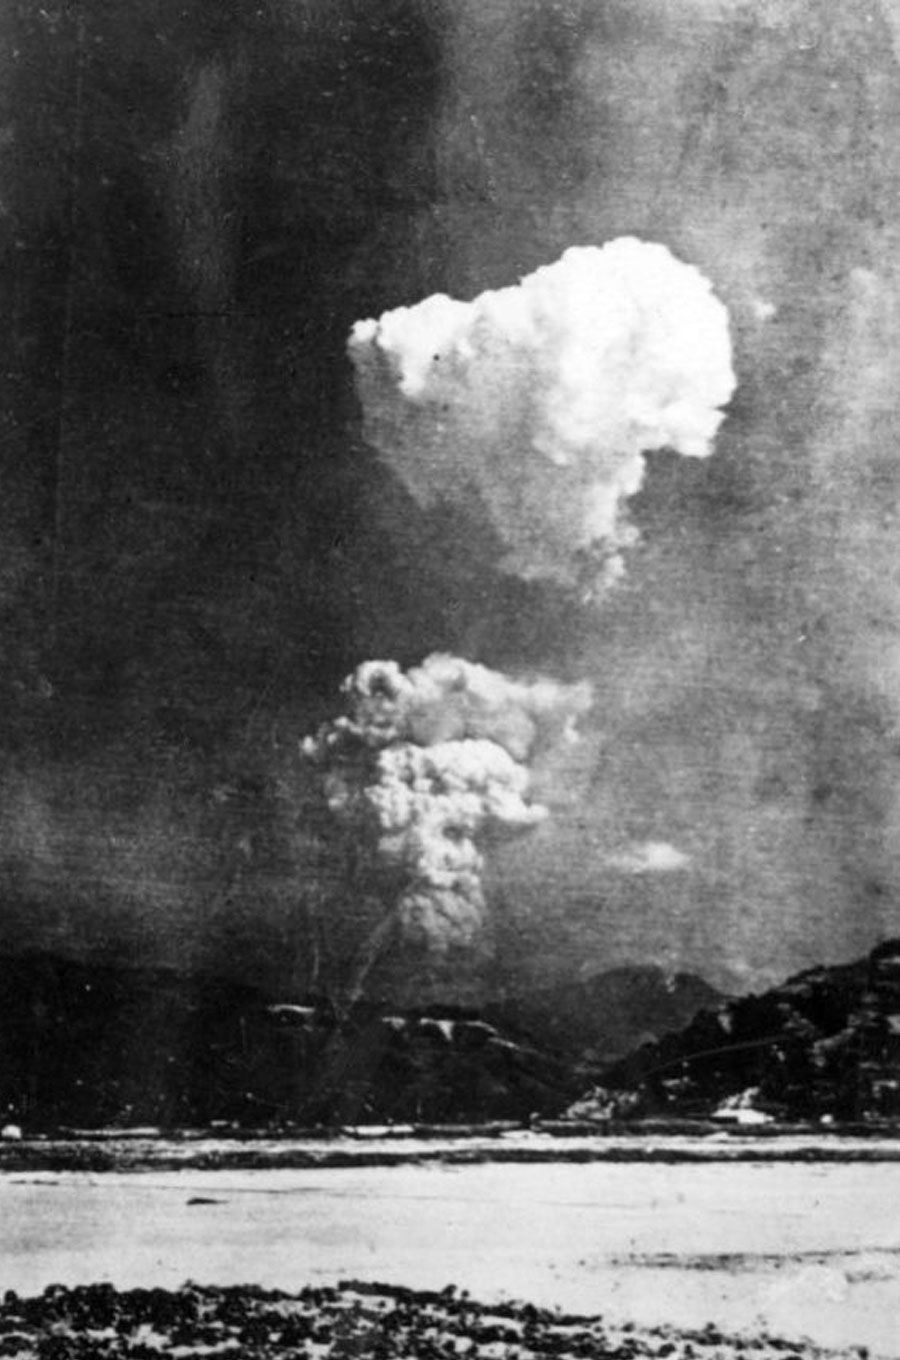 The Hiroshima atom bomb cloud two to five minutes after detonation